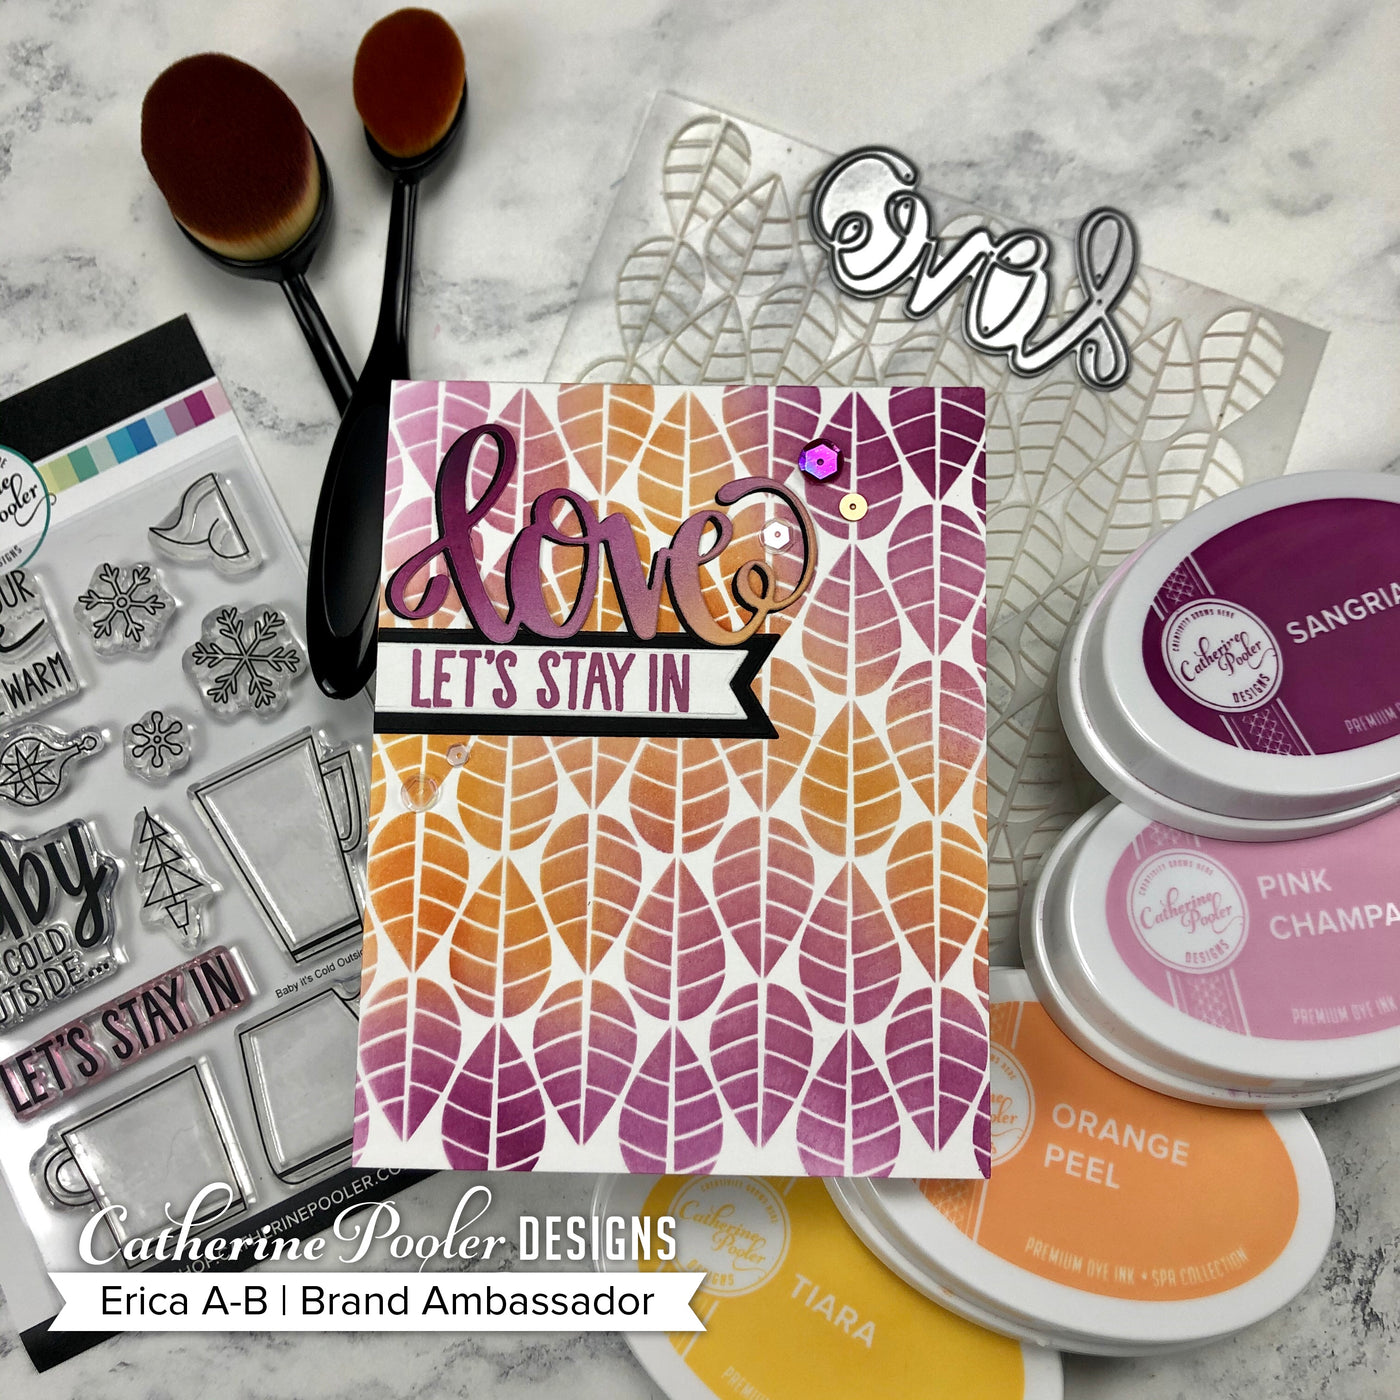 Catherine Pooler Designs - Acrylic Grid Stamping Block 2.75 inch Round